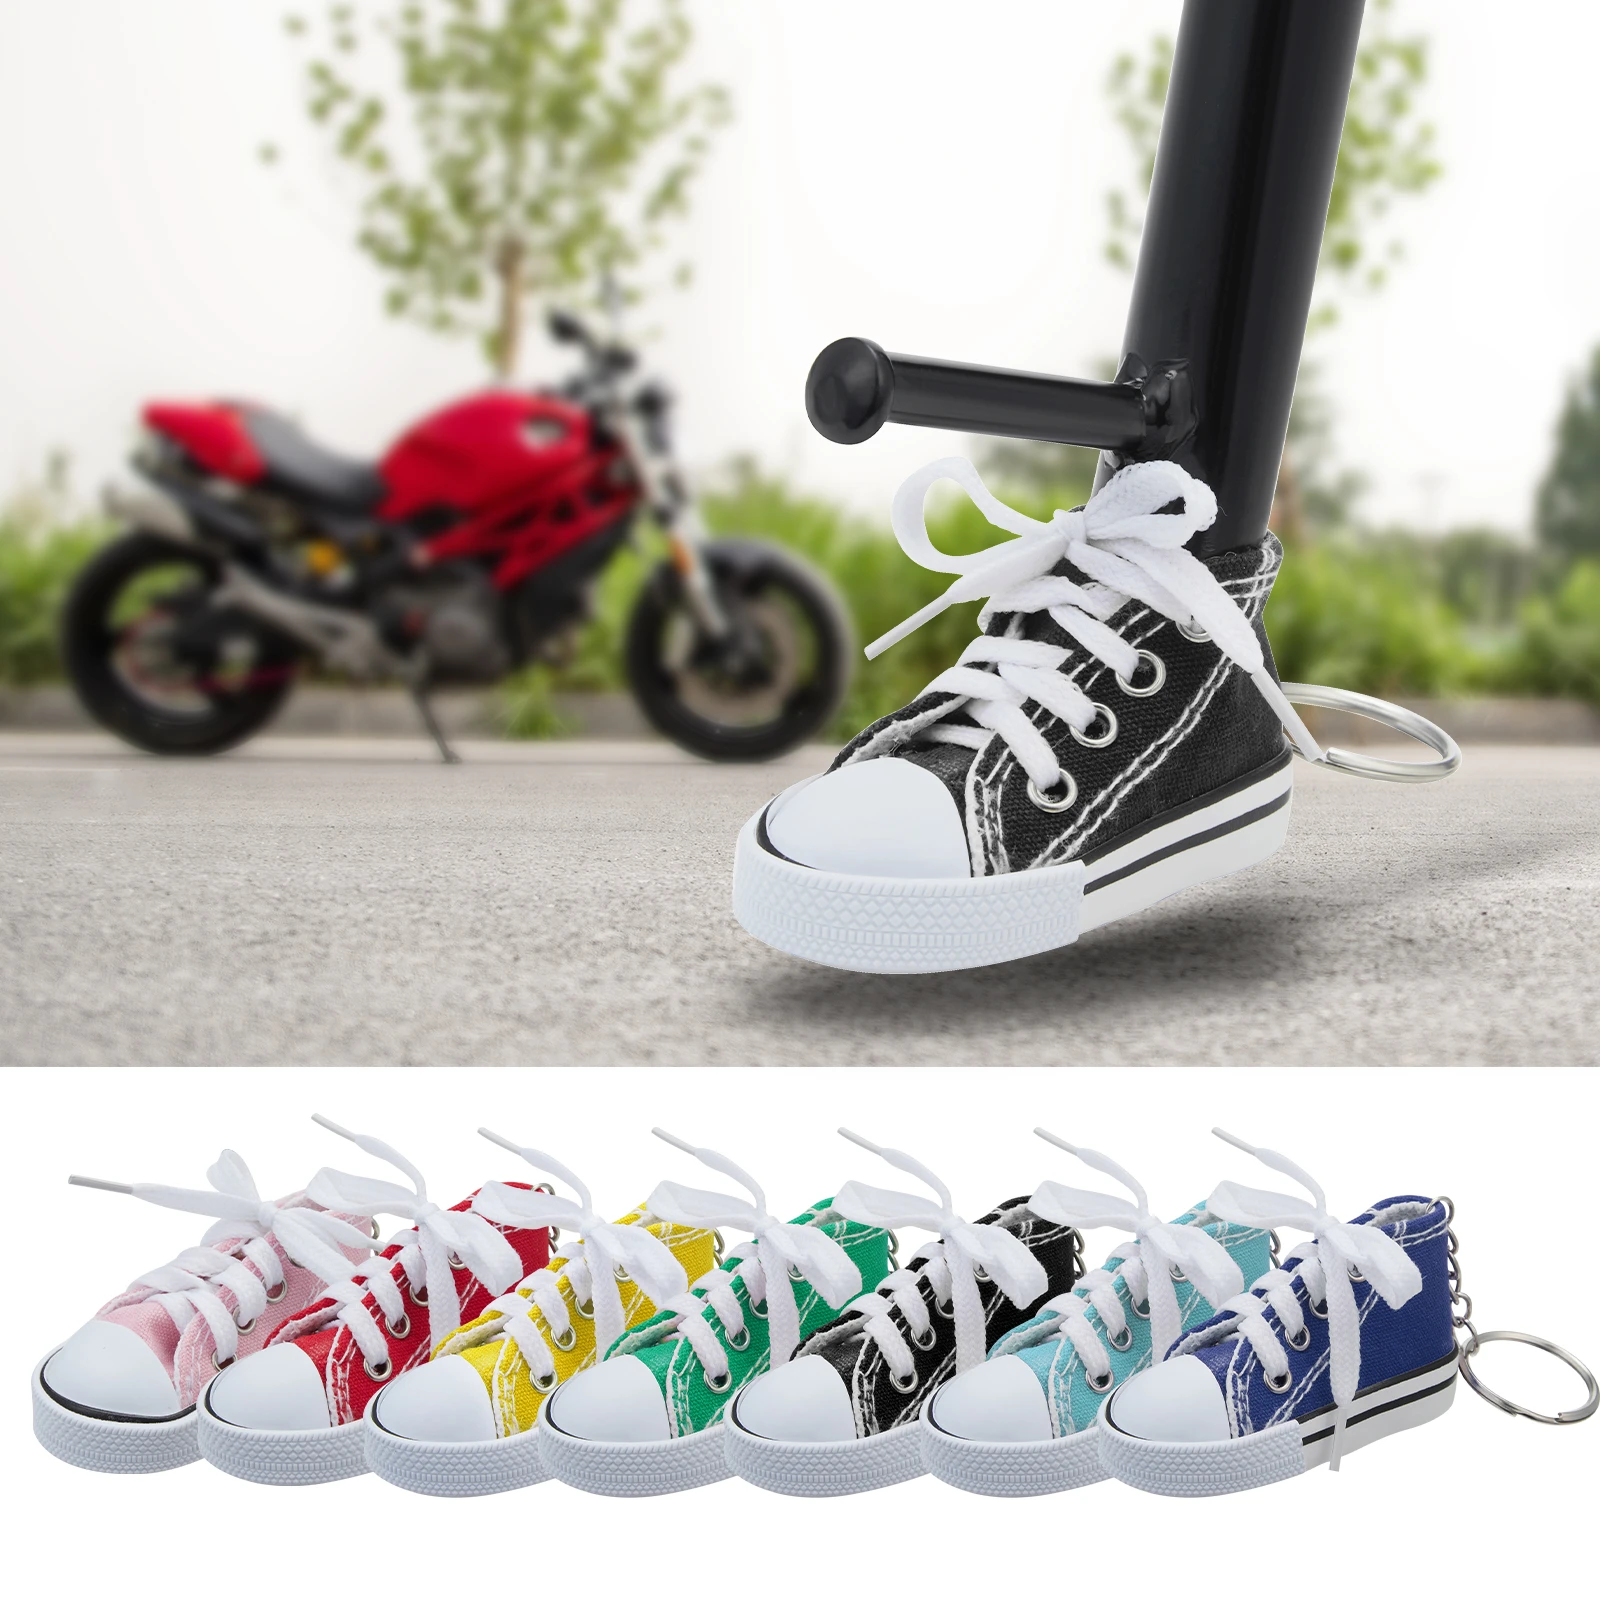 1pcs Creative Tripod cover For Motorcycle Bicycle Side Shoe Shape Foot Support Electric bike Tripod Decor Moto Parts New 2021 foot rest under desk